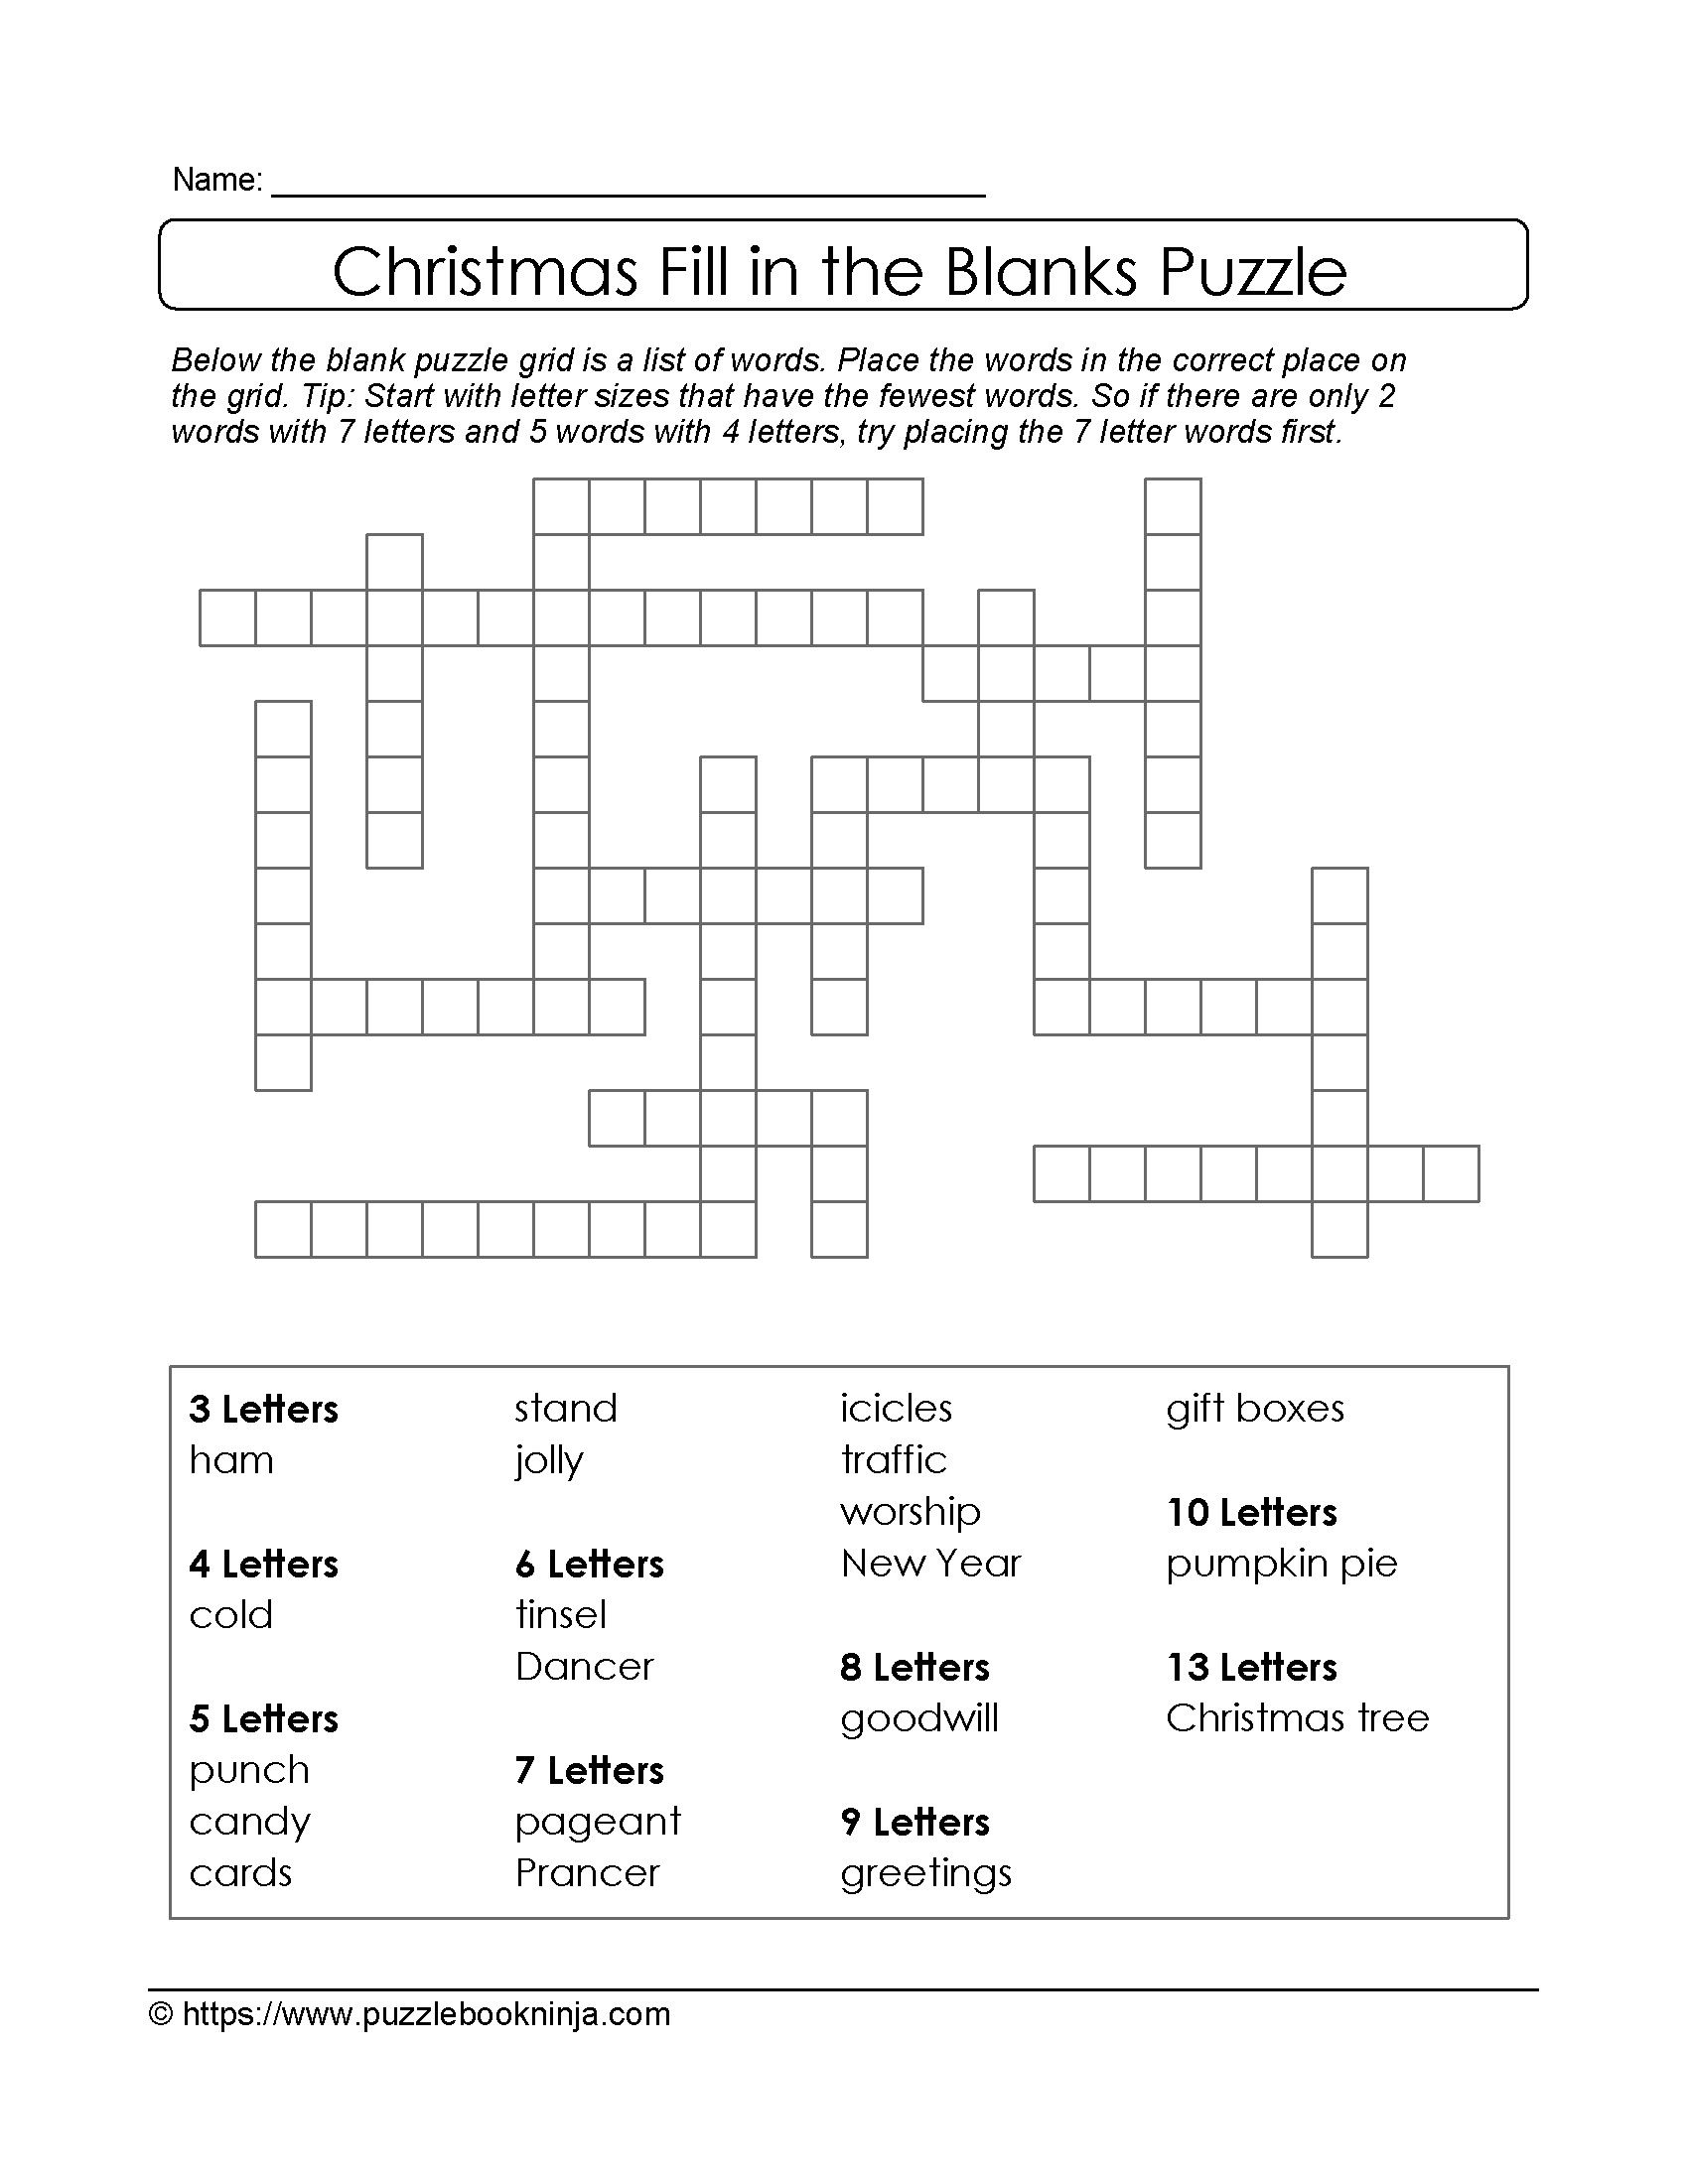 Freebie Xmas Puzzle To Print. Fill In The Blanks Crossword Like - Printable Crossword Puzzle Grid